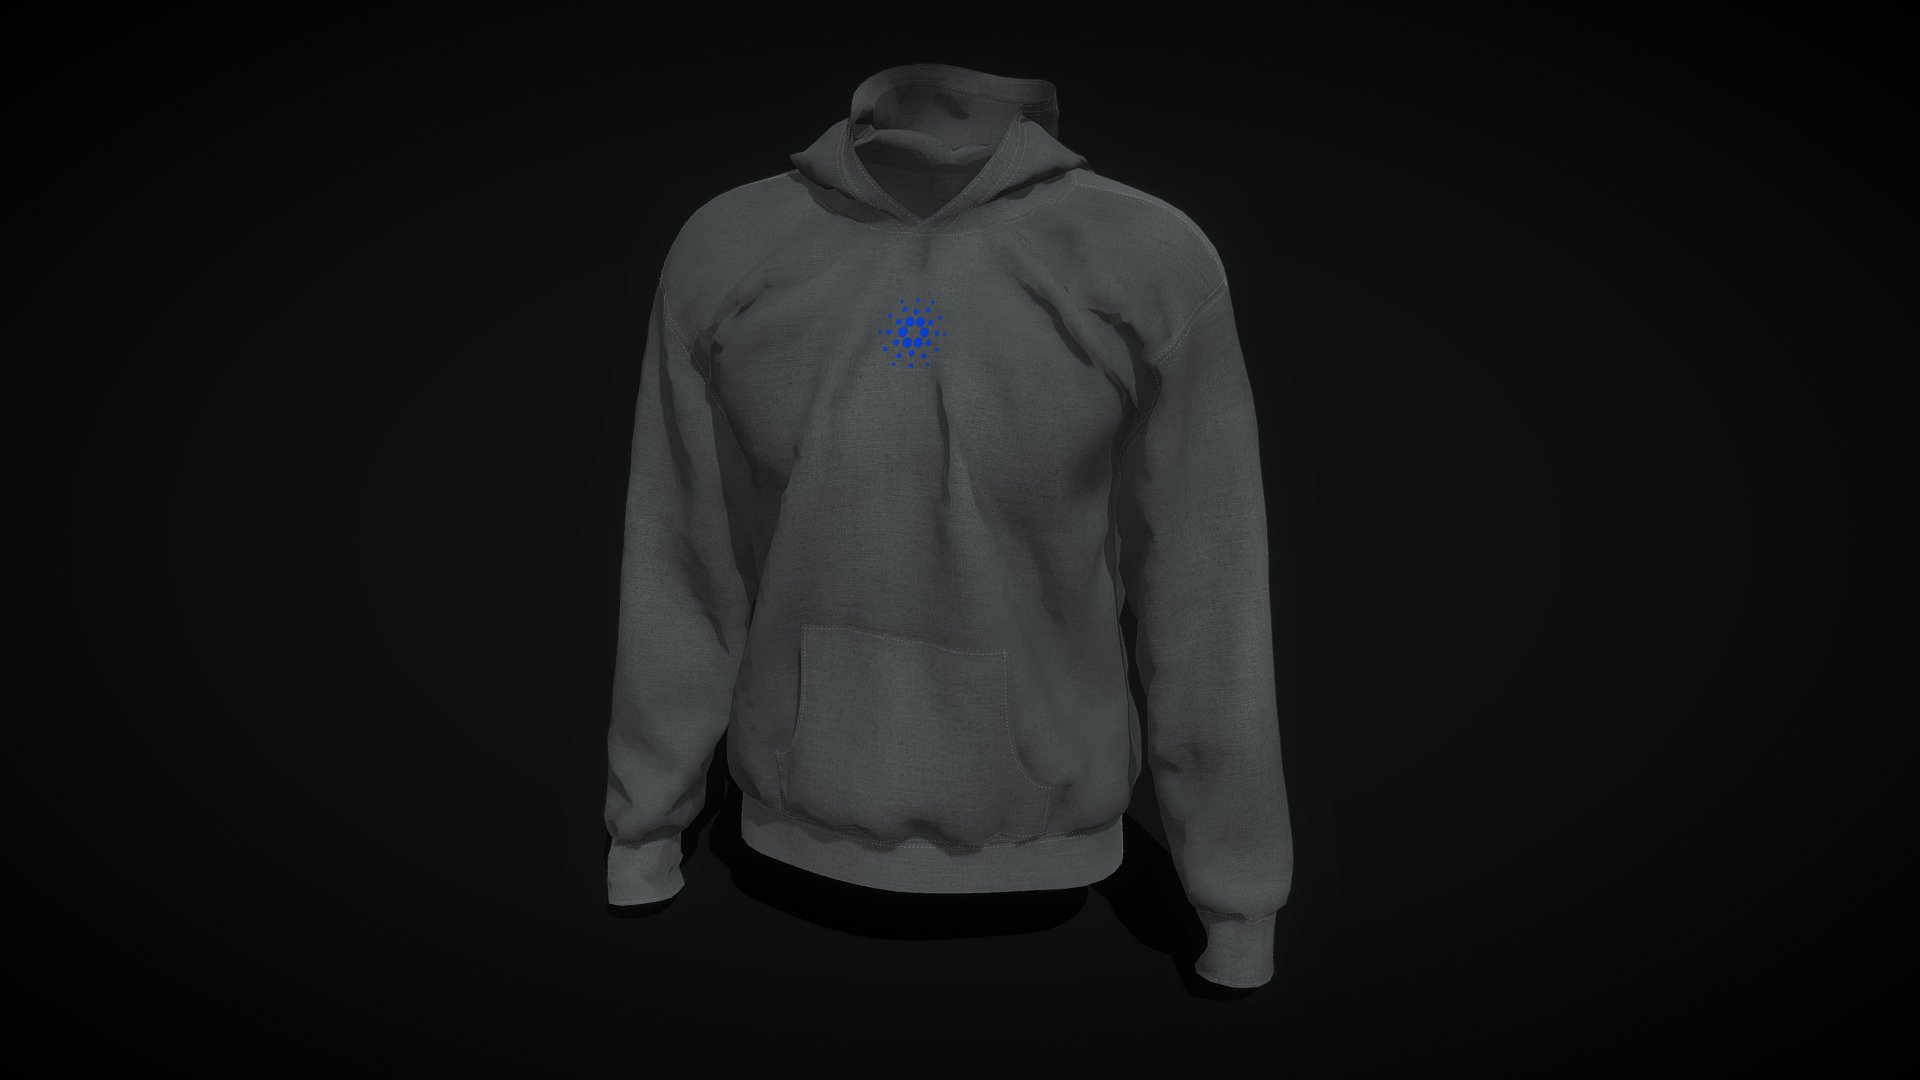 Textures in (4096x4096 px)

About the process:

Digital painting in 3D Coat

by Lucid Dreams visuals

www.luciddreamsvisuals.com.ar - CARDANO Crypto Trader Hoodie - Buy Royalty Free 3D model by Lucid Dreams (@vjluciddreams) 3d model